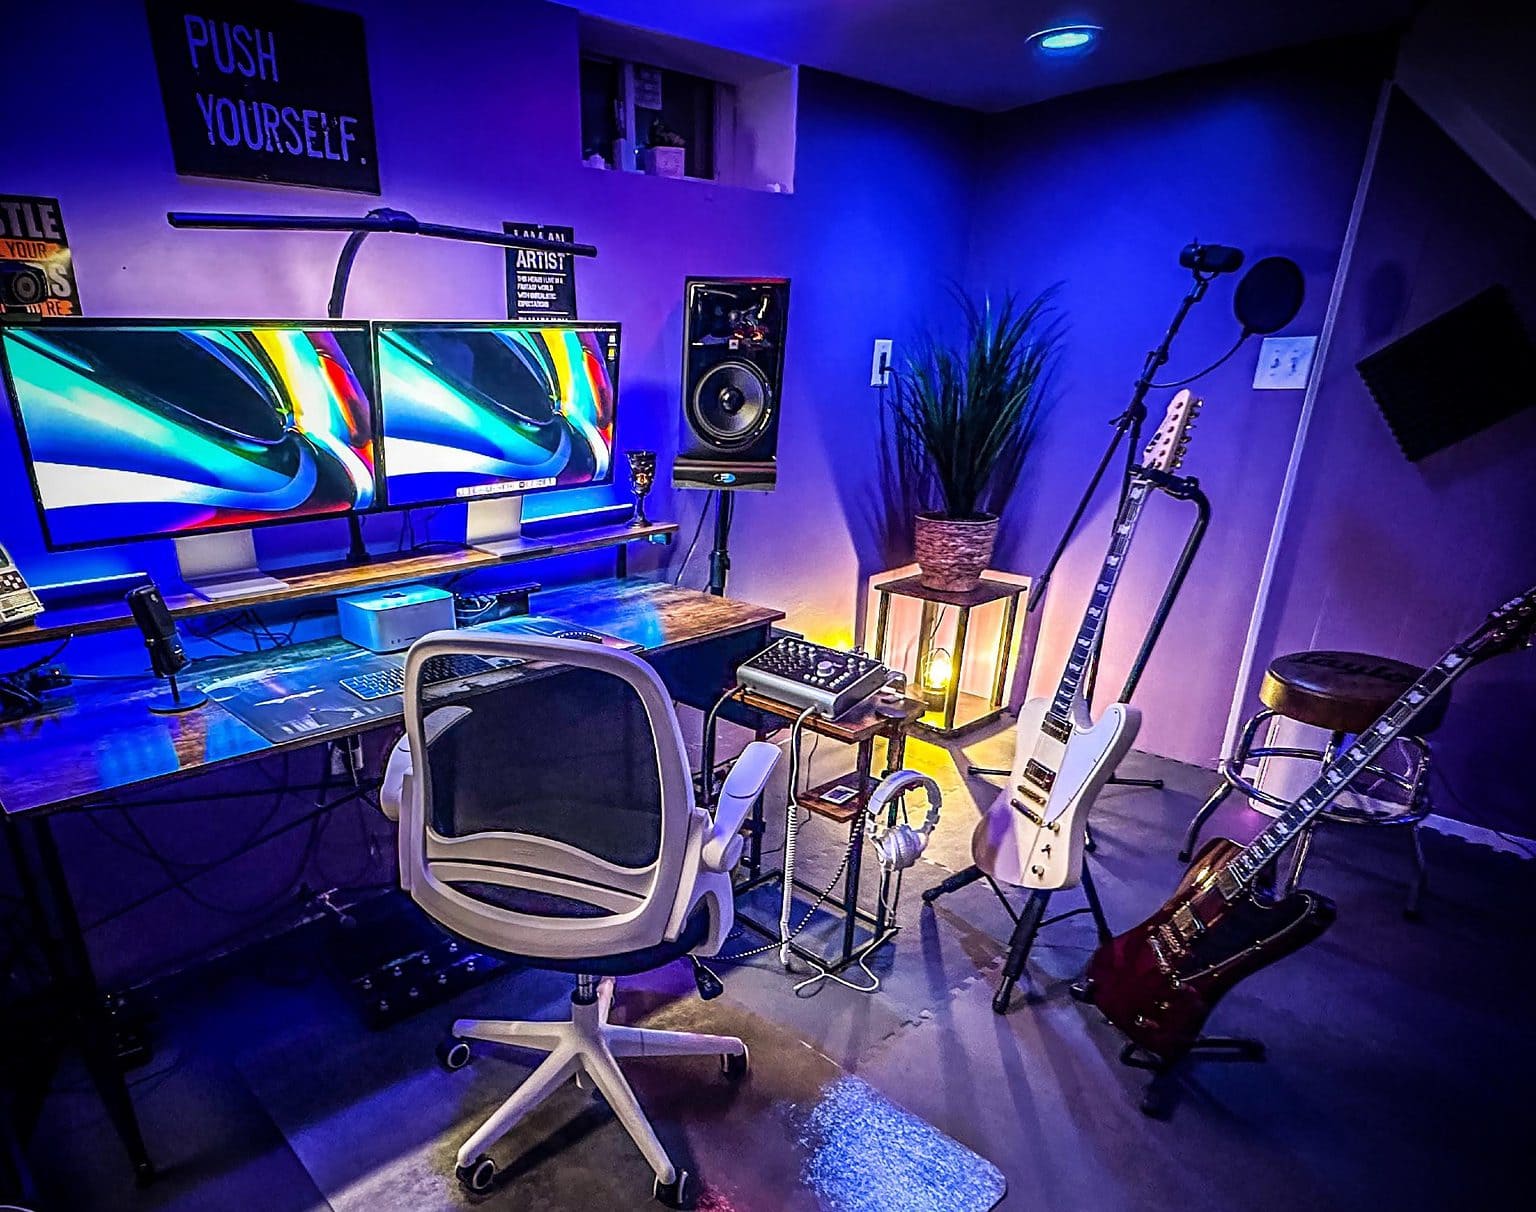 A Mac Studio, two Studio Displays and a whole lot of audio gear and guitars make up this music setup. The Audient iD44 audio interface on the stand in the center of the photograph got replaced with an Apollo X Twin Heritage audio interface.